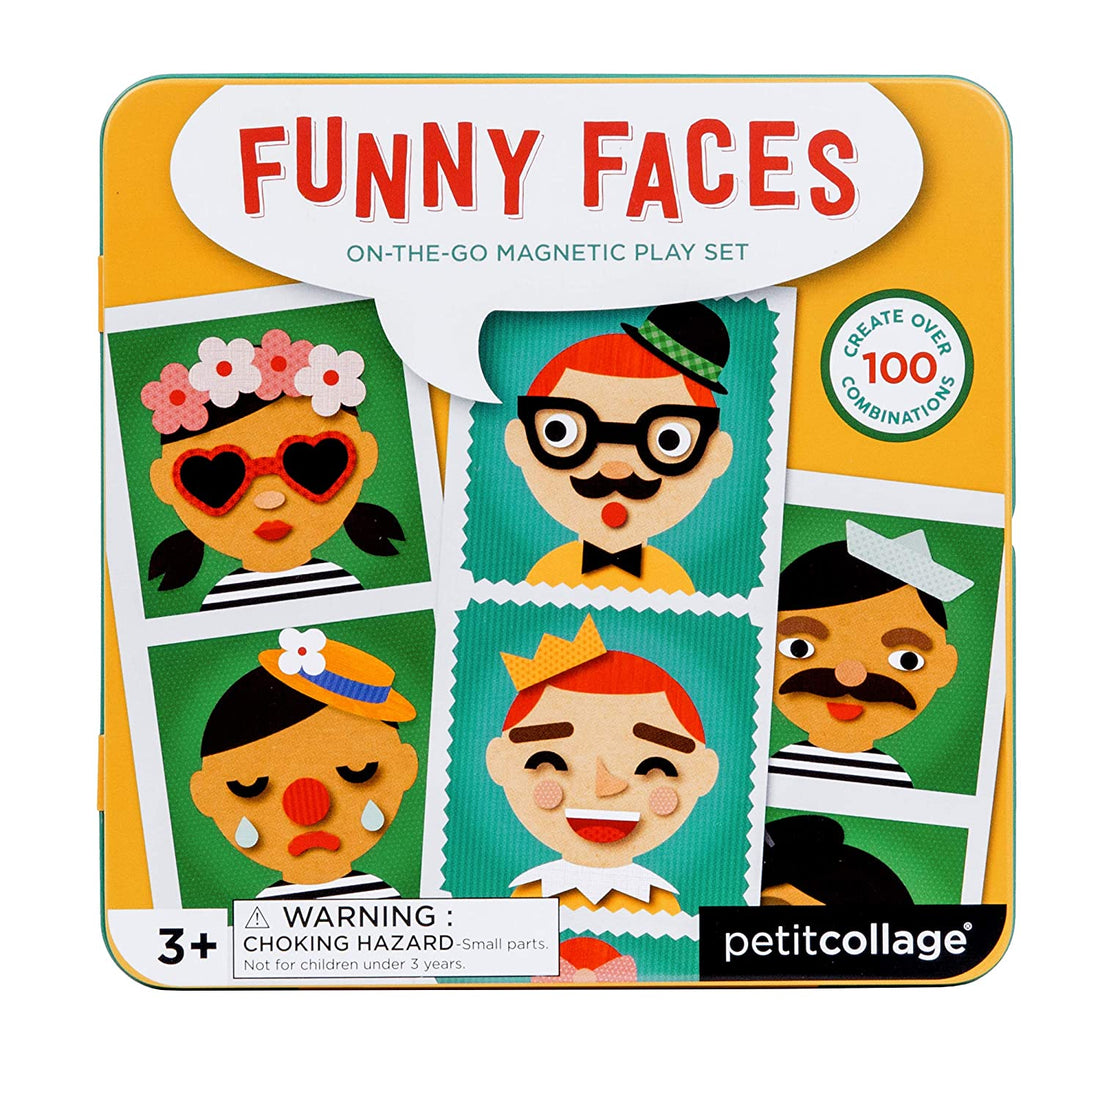 20% OFF On The Go Magnetic Play Set - Funny Faces